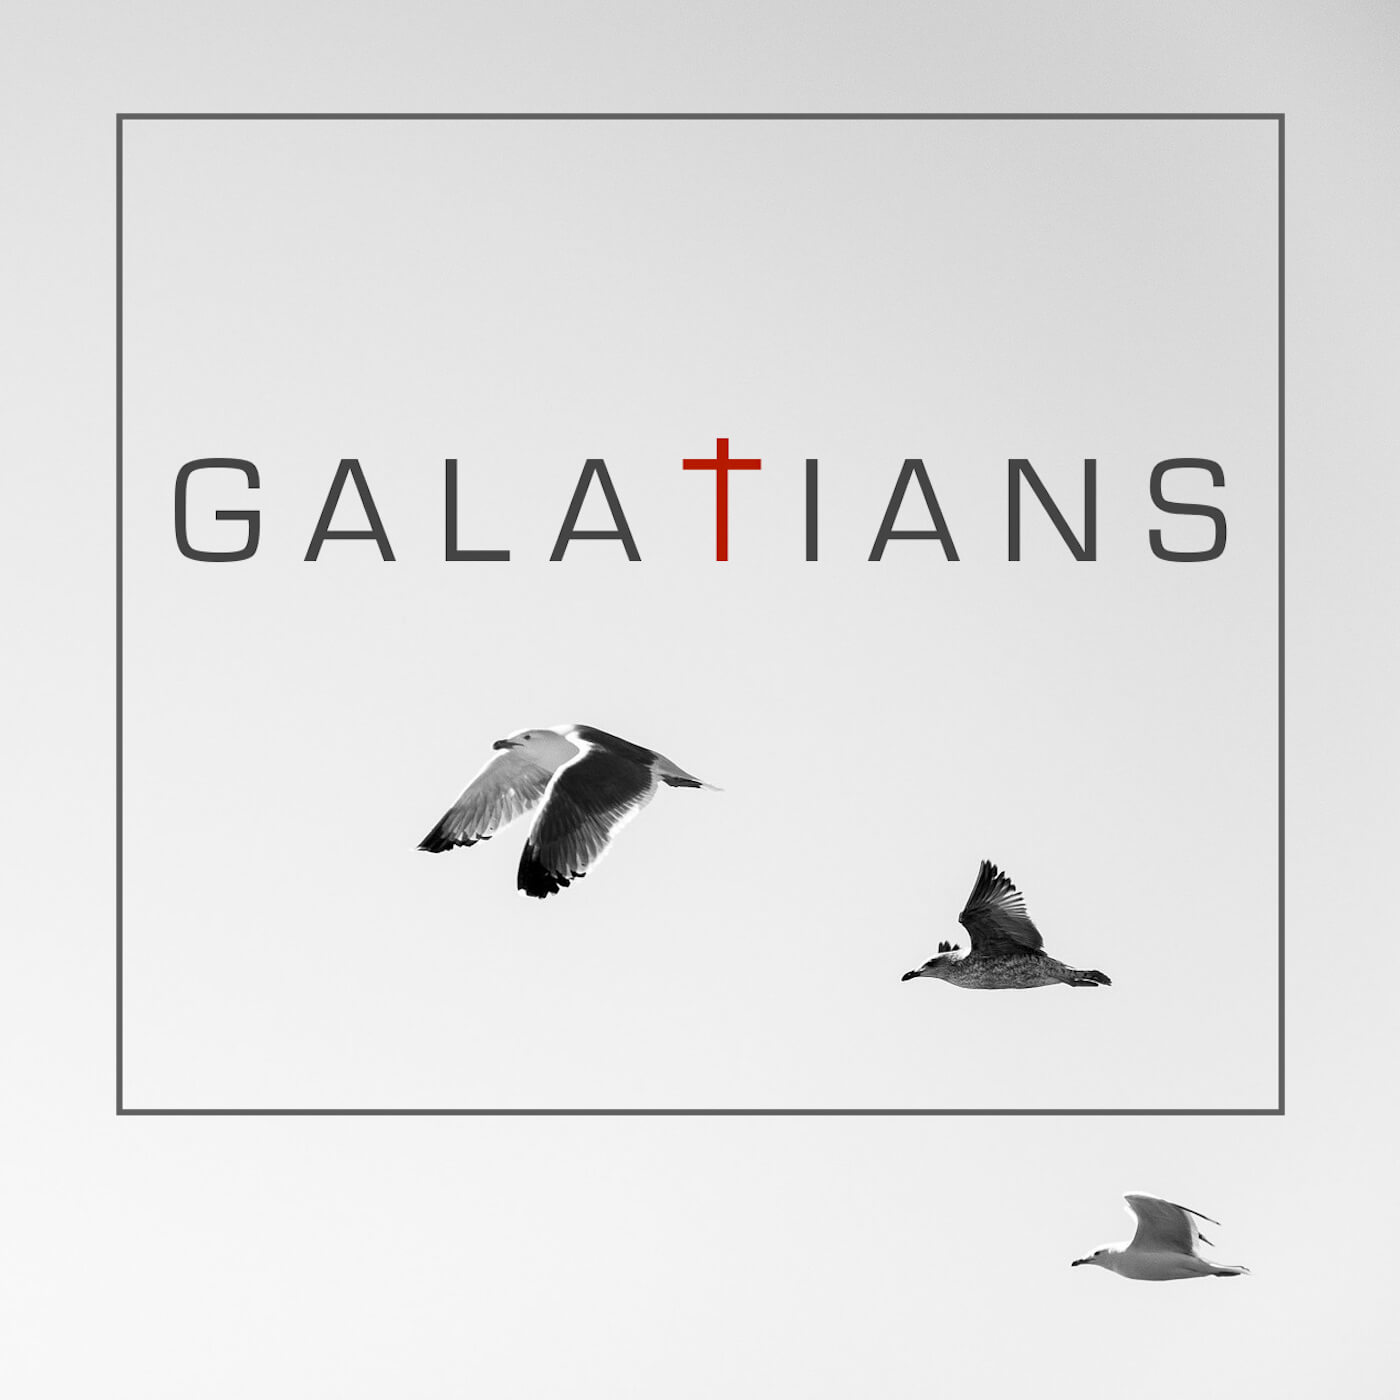 Galatians Album Cover, the word Galatians in black on white background, red cross for the t, and birds flying